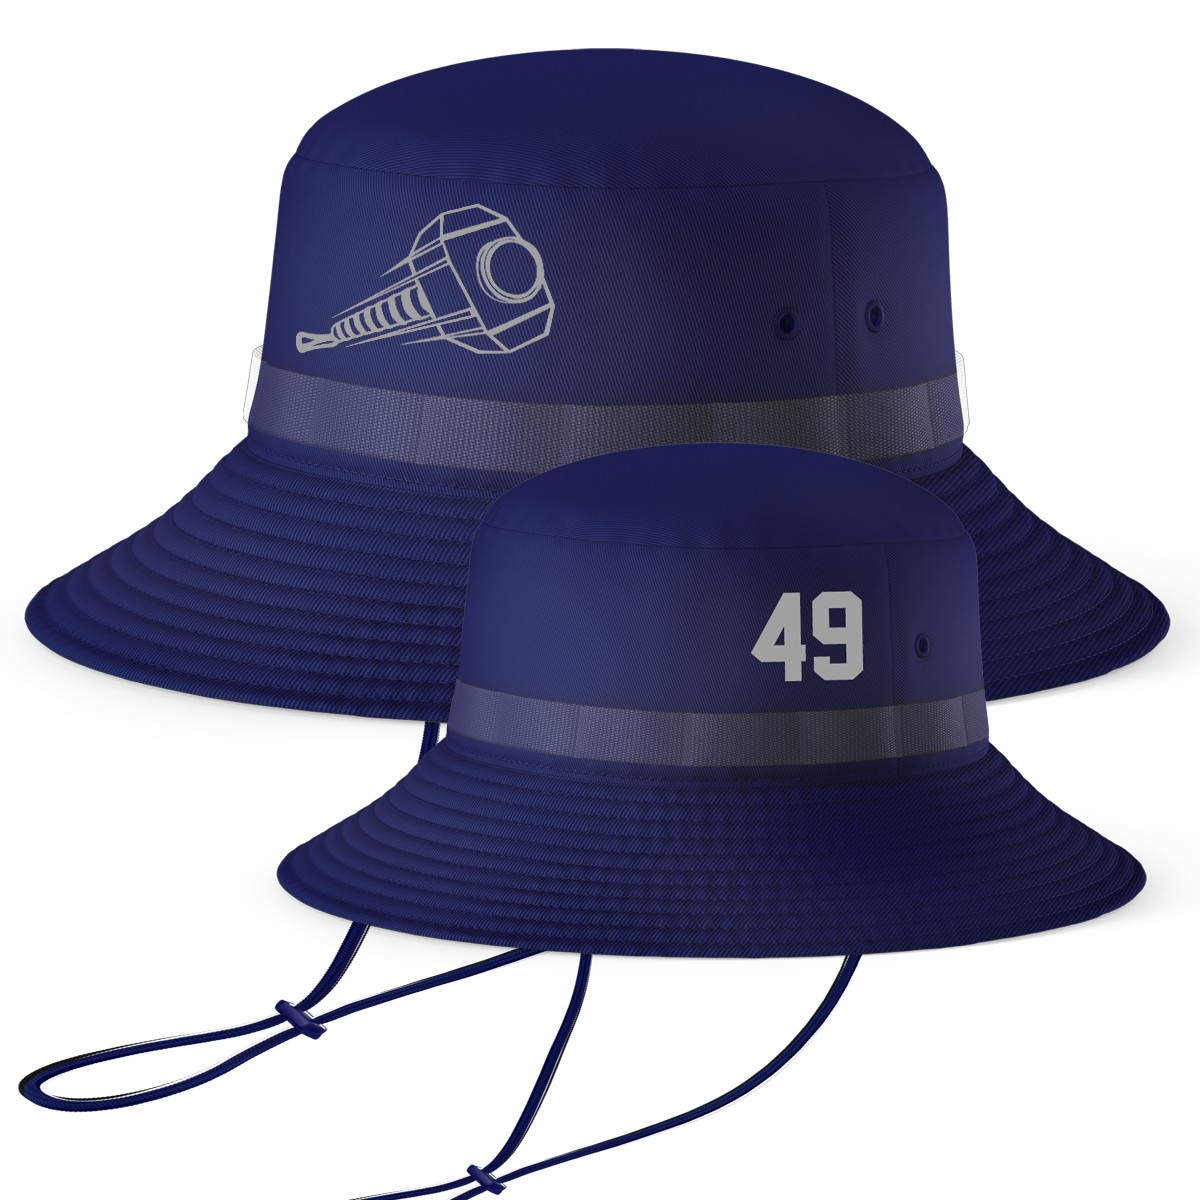 Hammers Bucket Hat with Playernumber/Initials